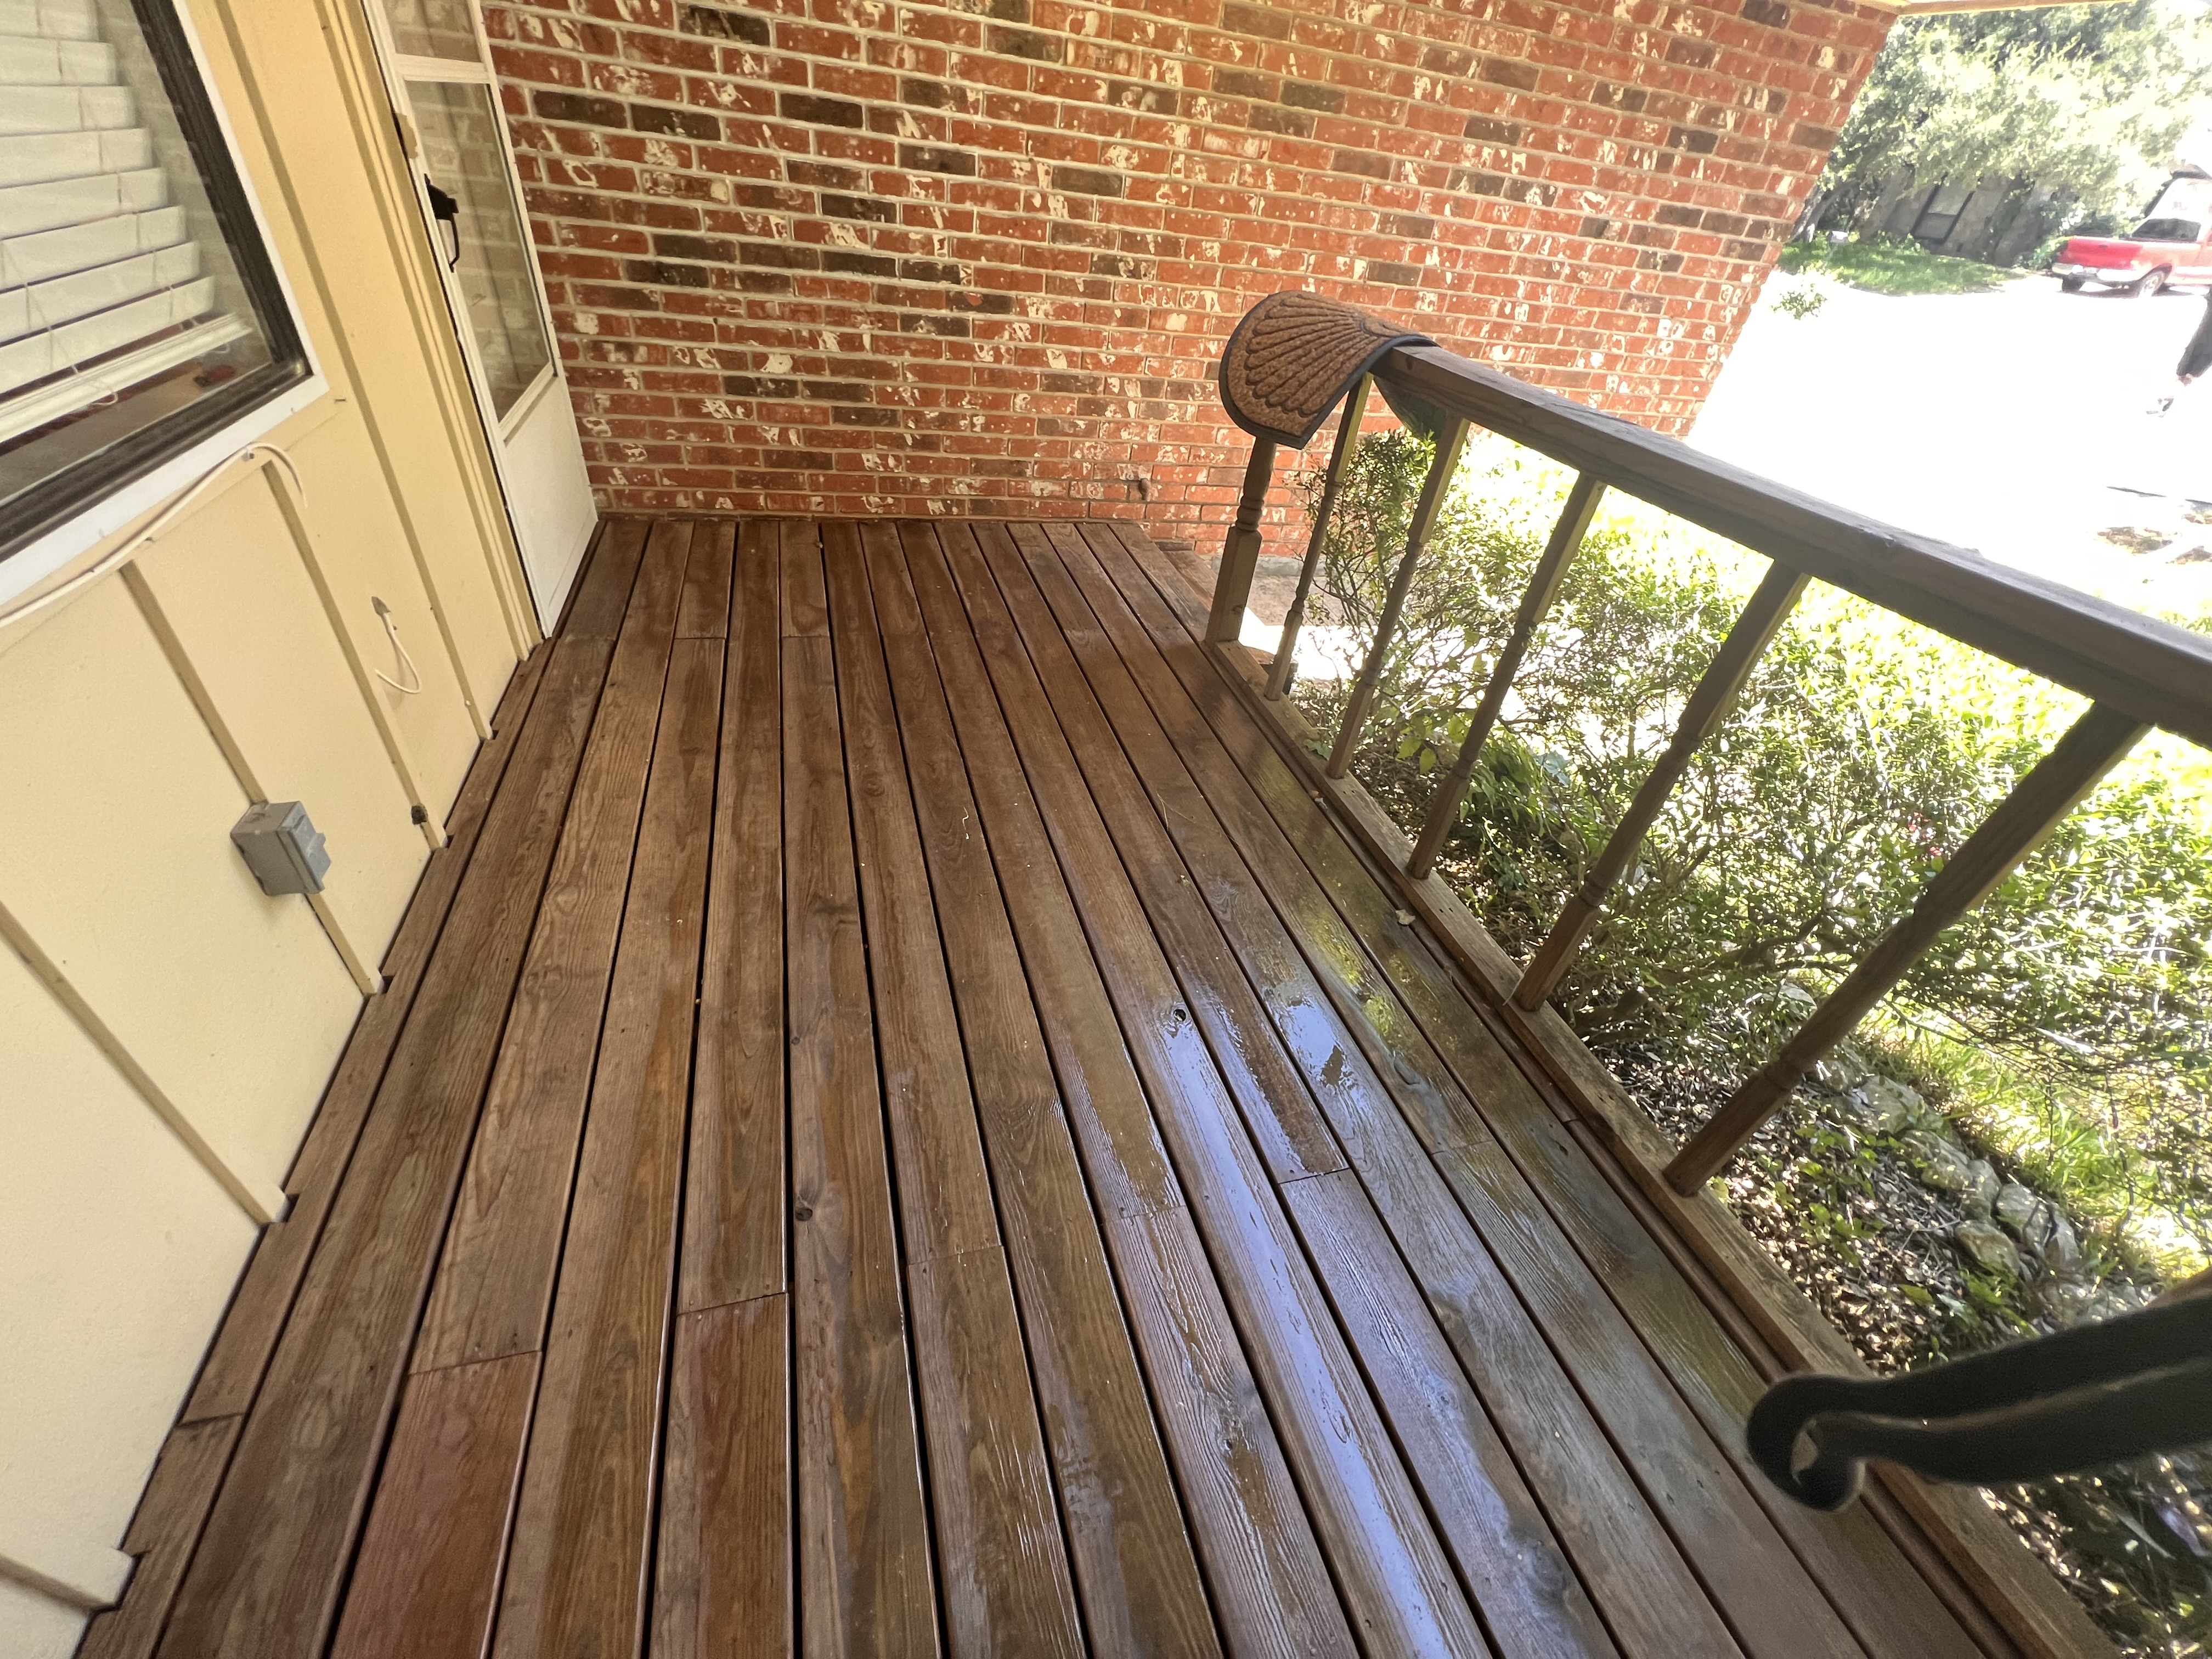 Power Washing Wood Deck and Outside Wood Door Cleaning in San Antonio, TX